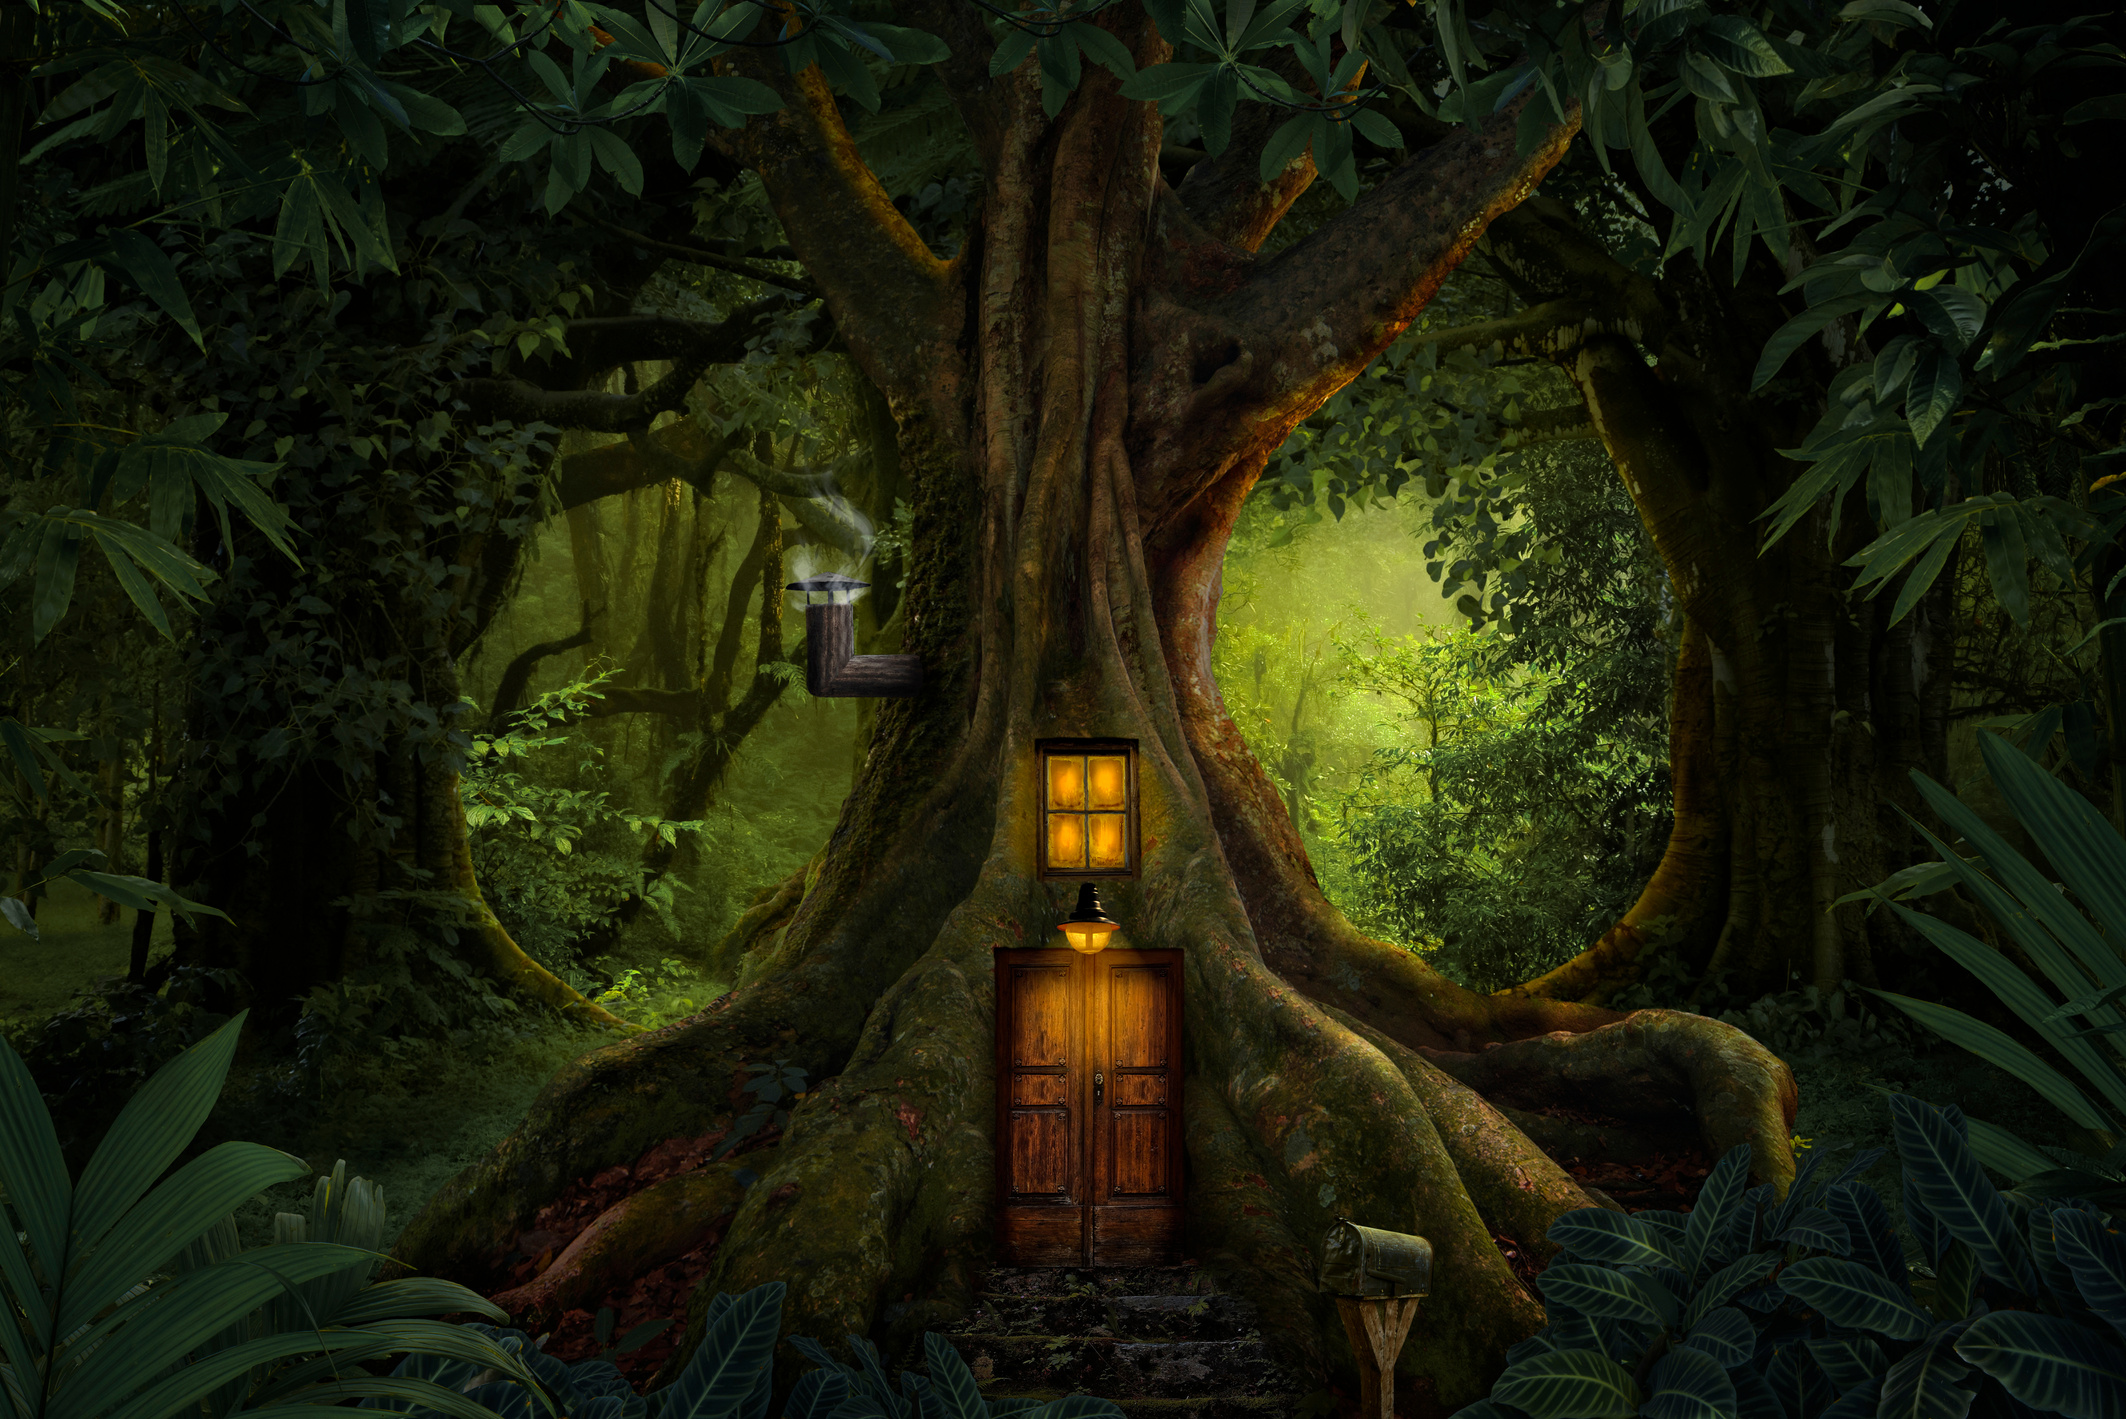 Magical story forest with small house